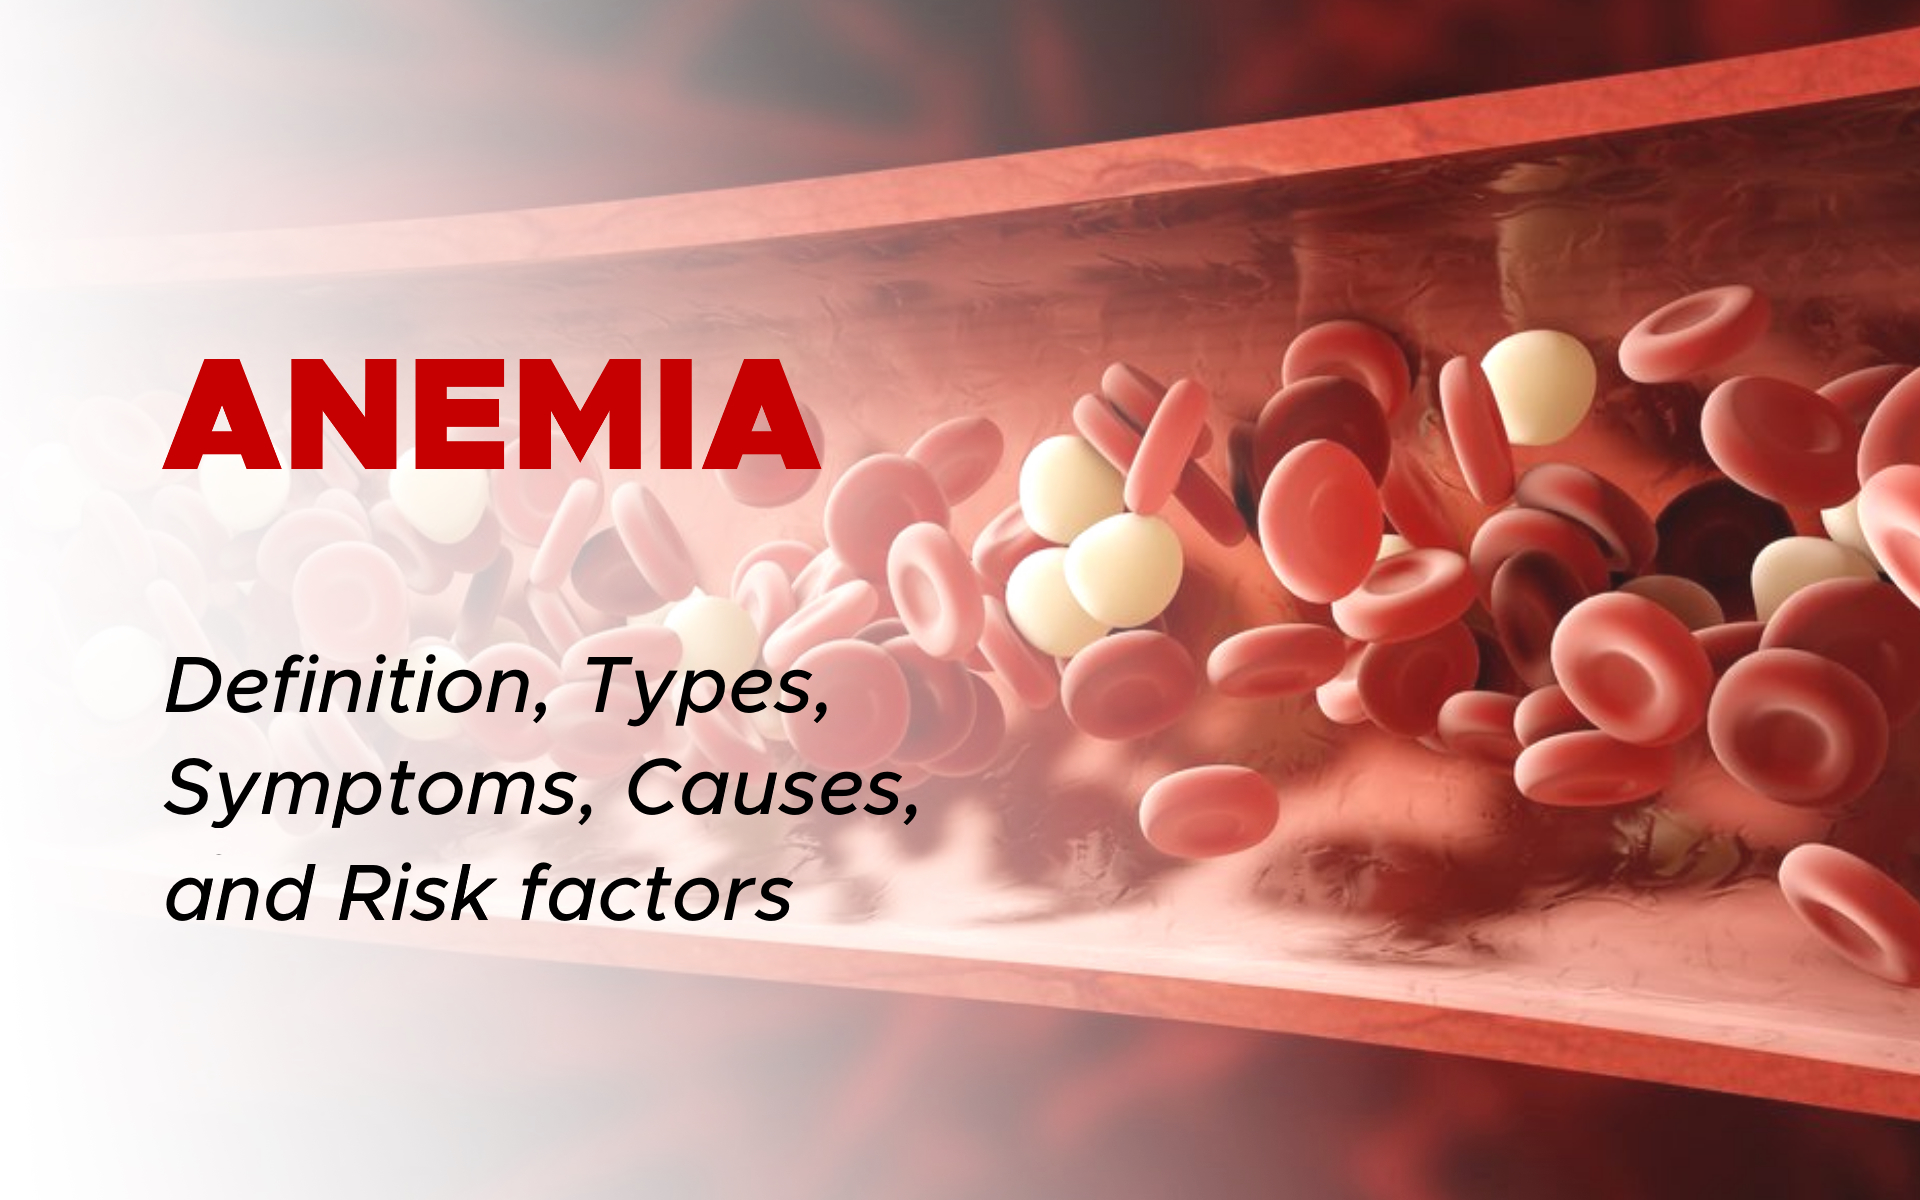 Anemia Overview: Definition, Symptoms, Causes, Types, and Risk factors